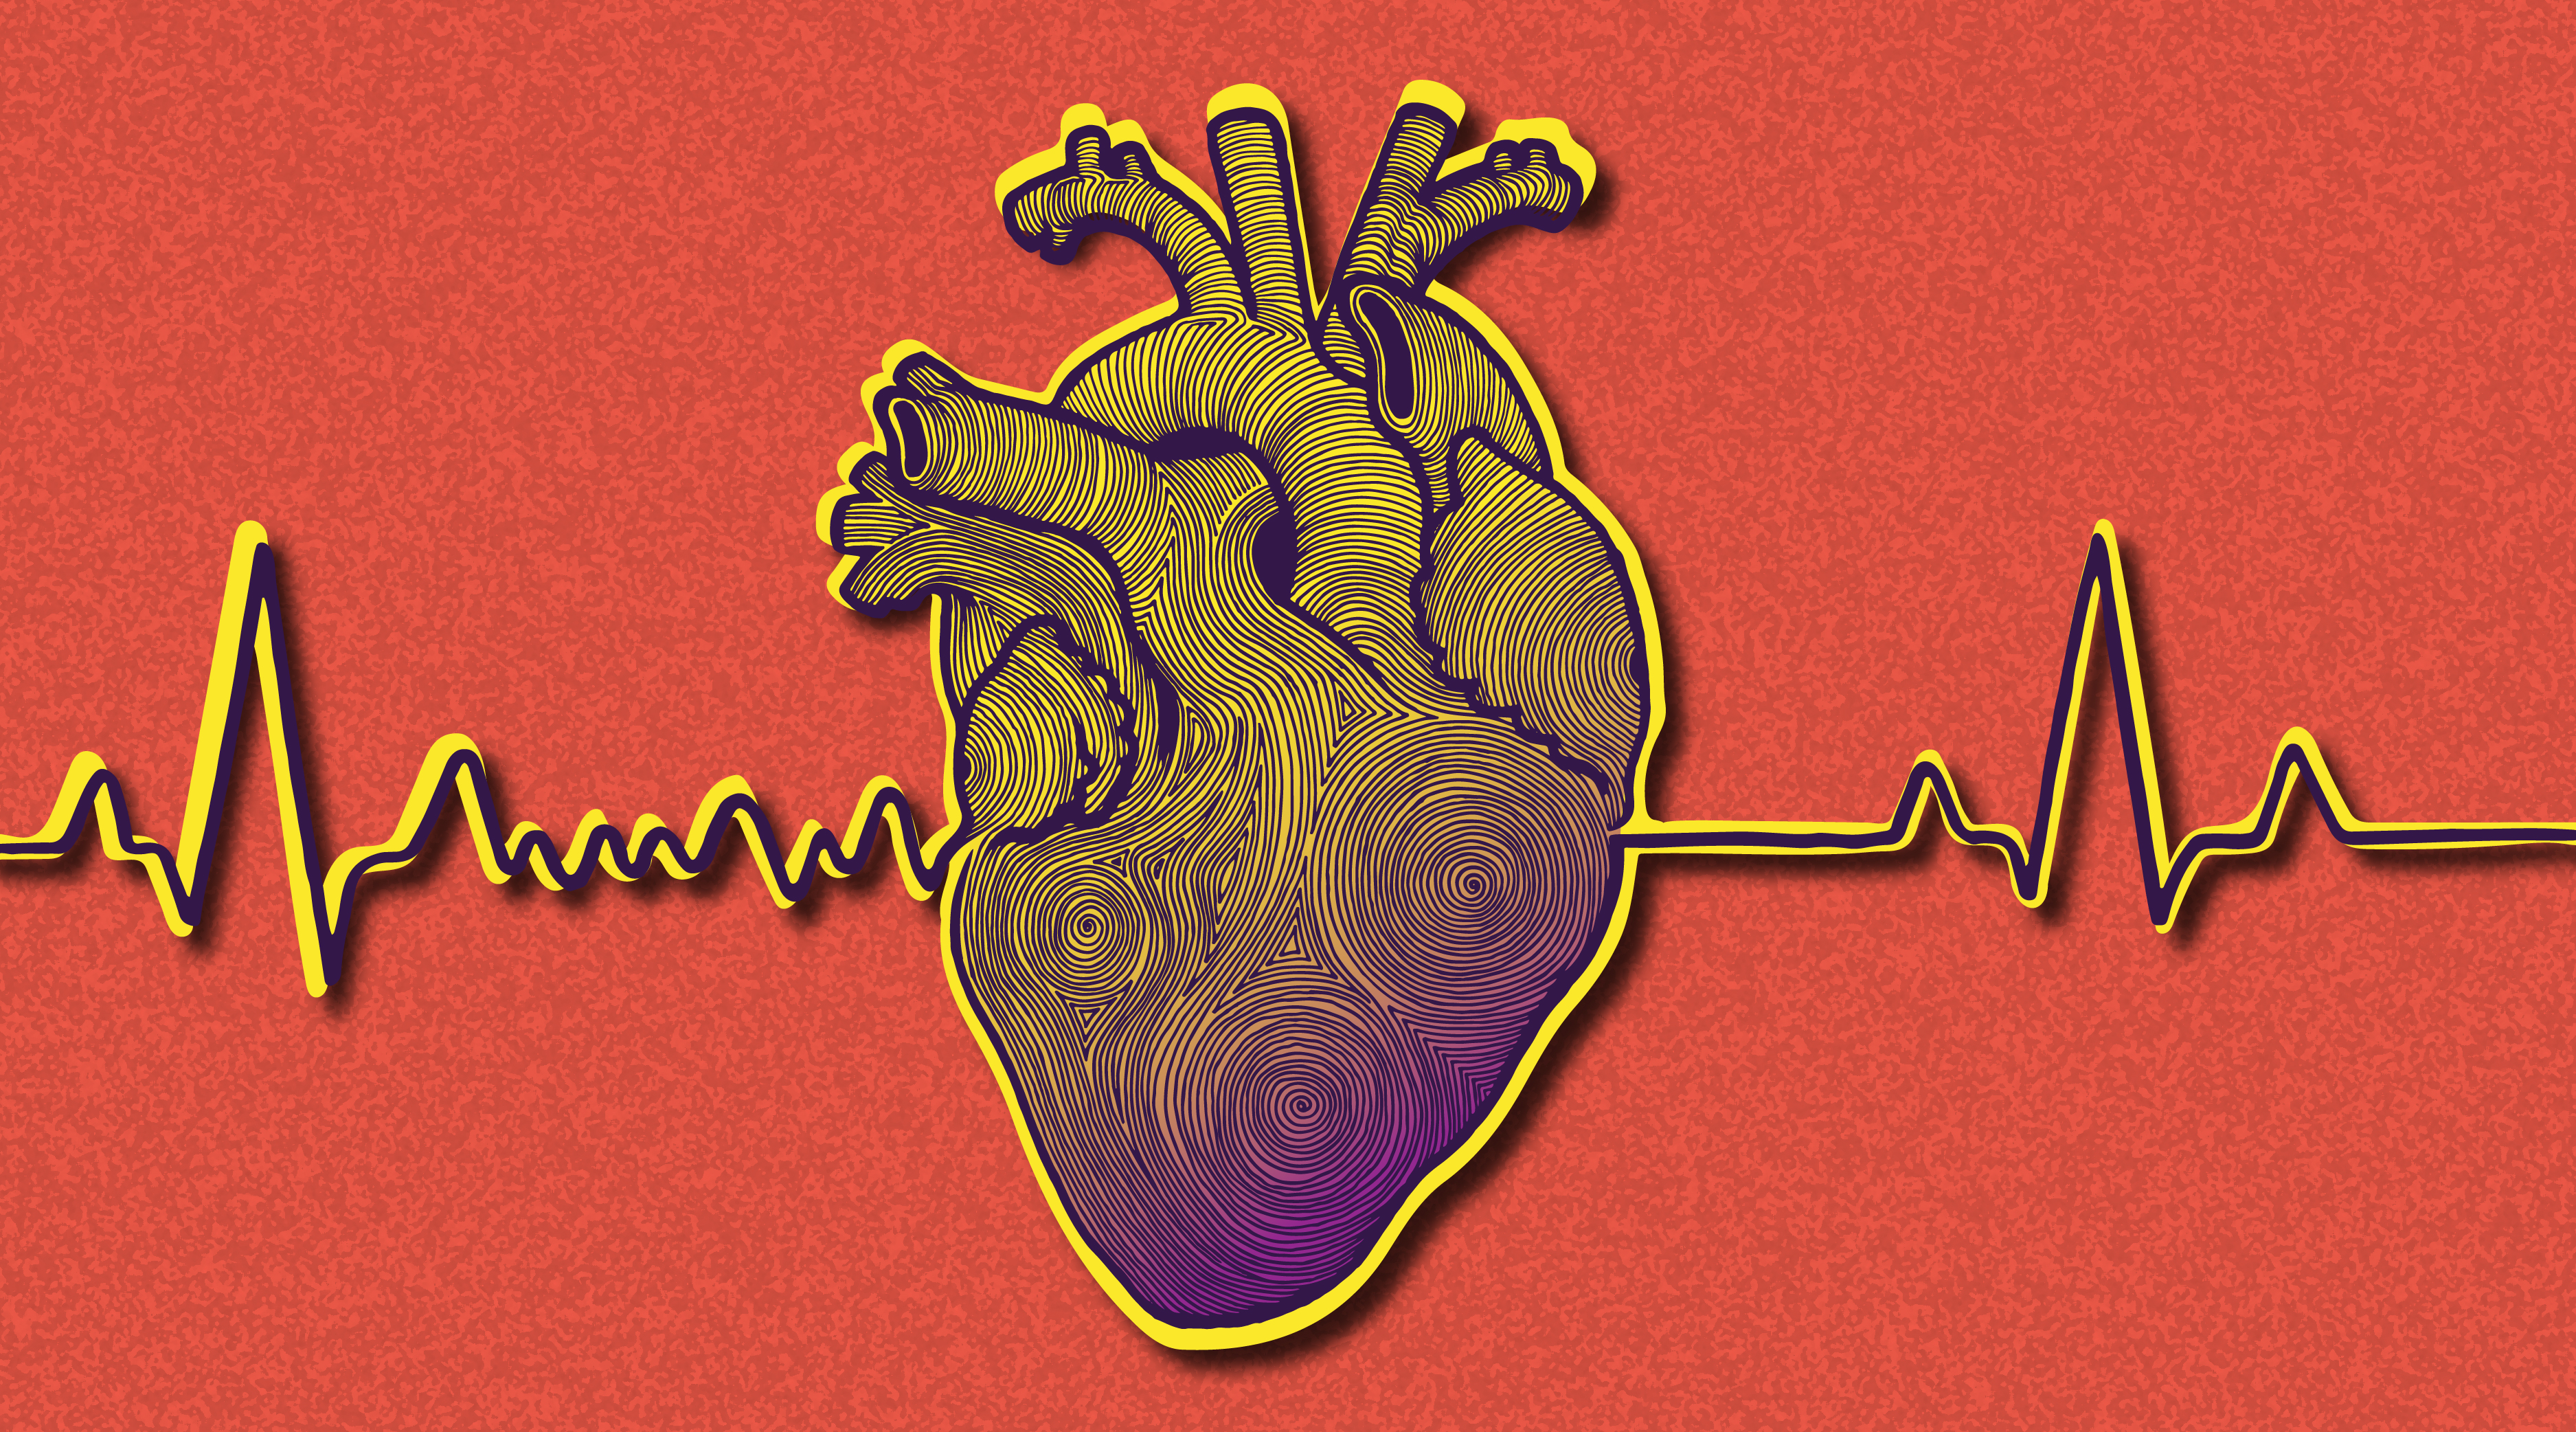 Understanding AFib: How to measure your own heart rate and rhythm